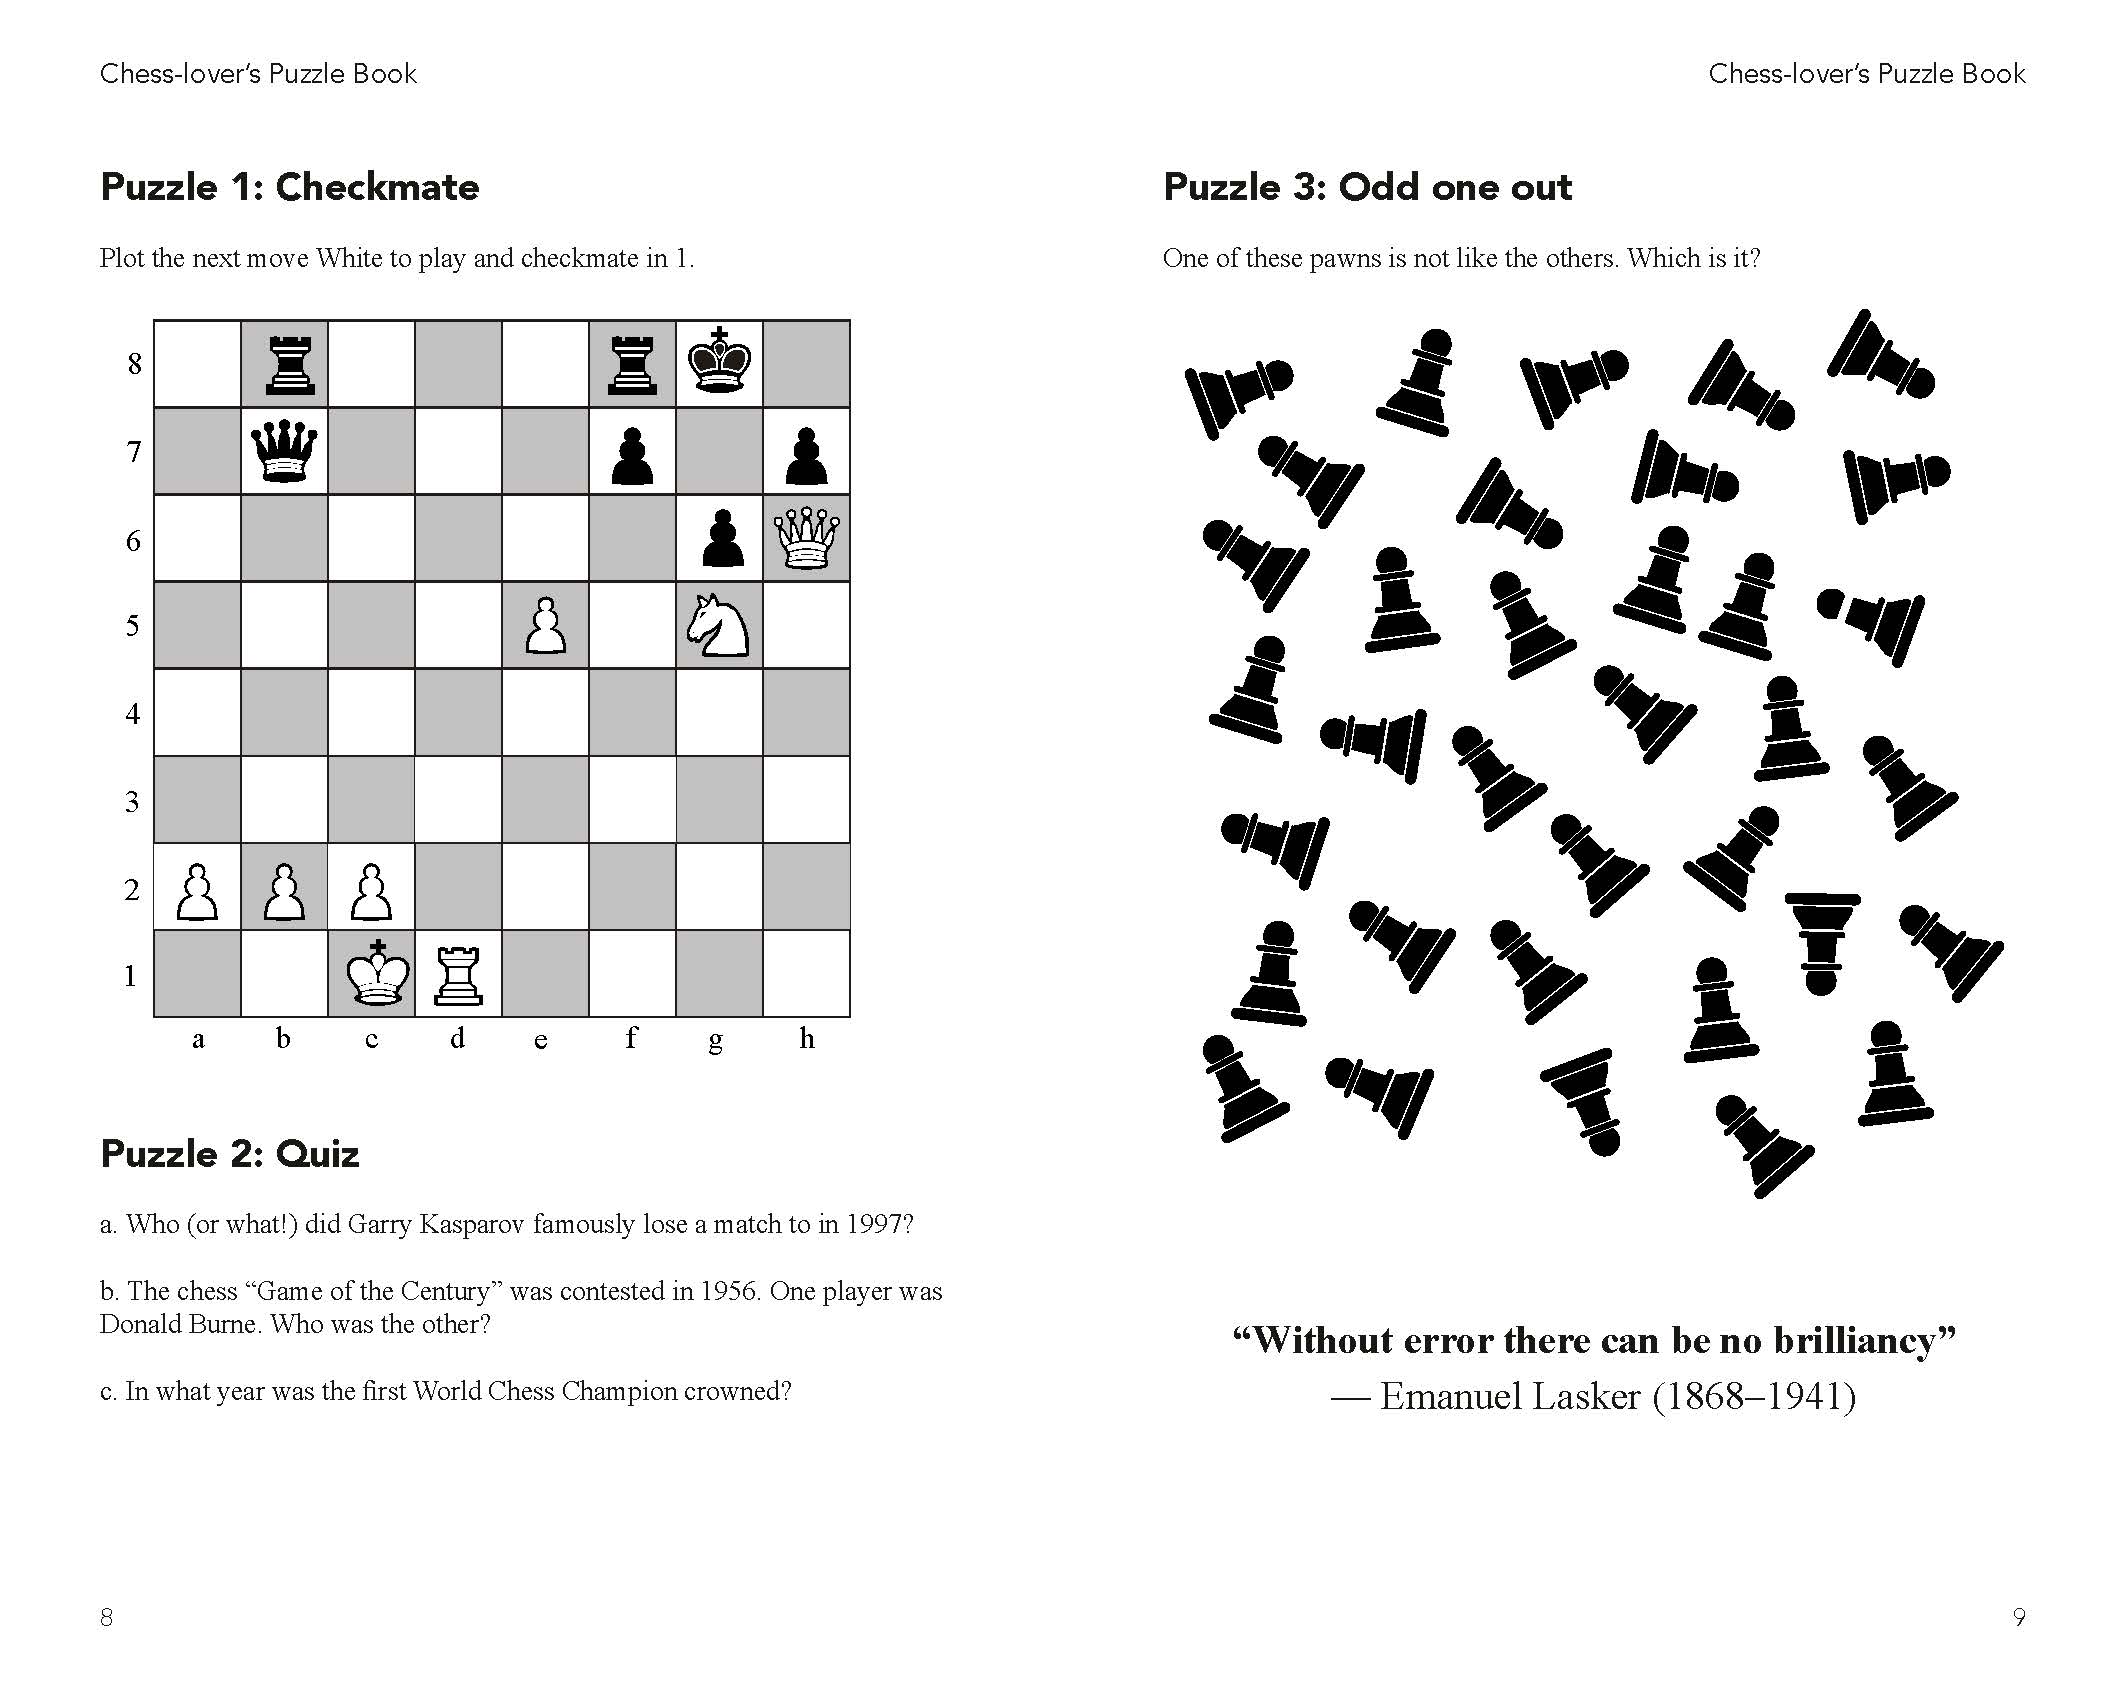 The Chess Lover's Puzzle Book